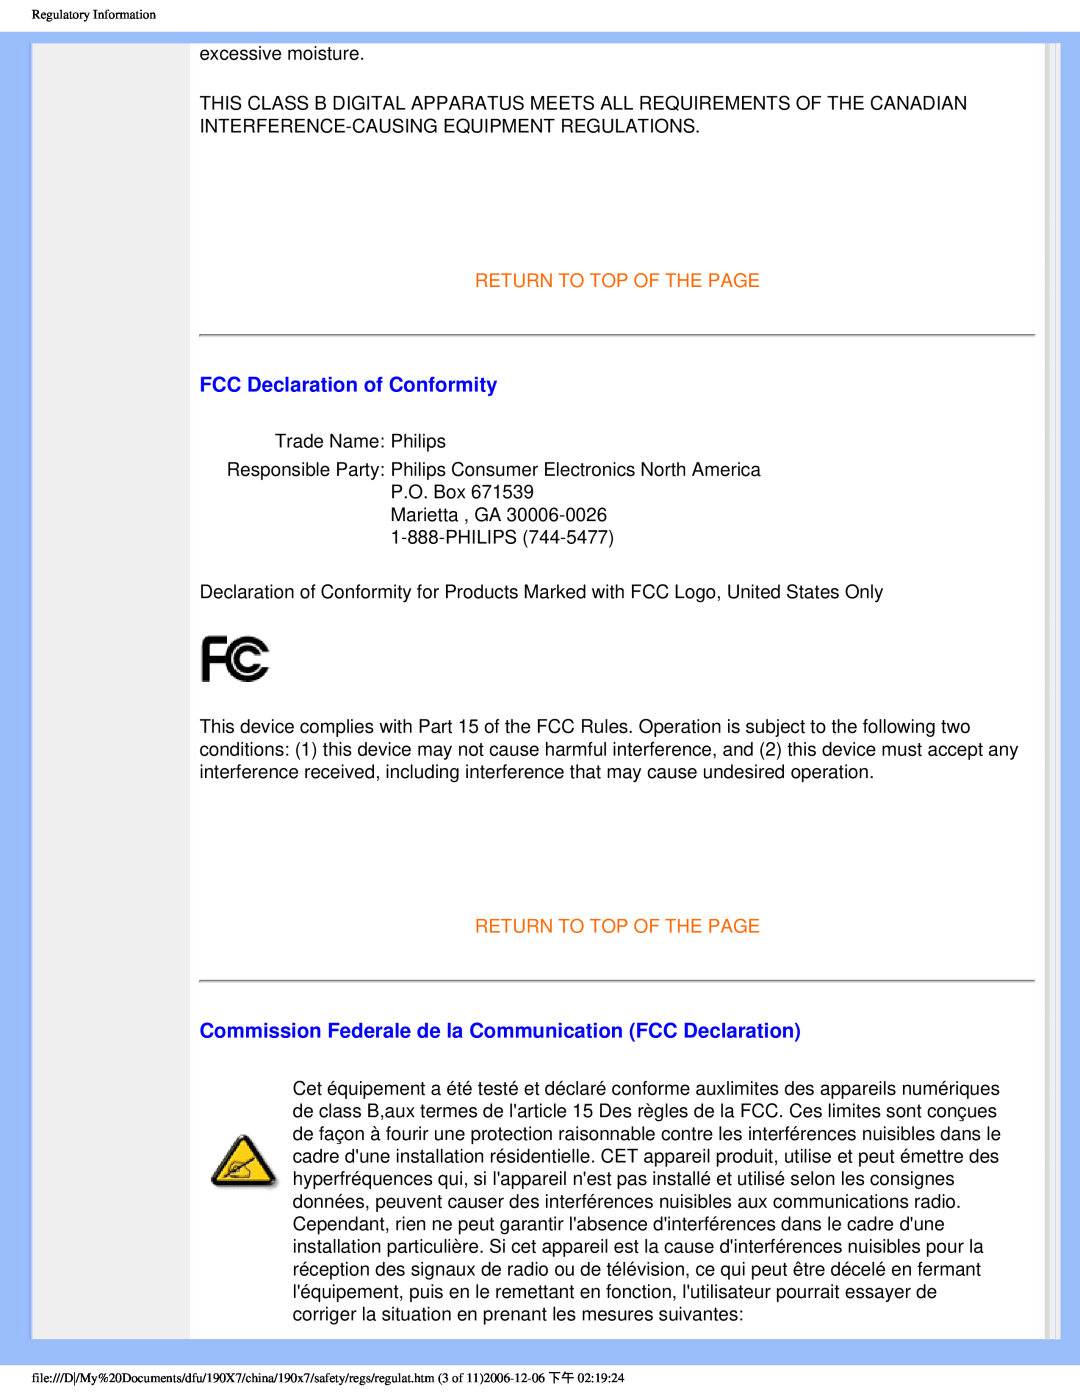 Philips 190X7 user manual FCC Declaration of Conformity, Return To Top Of The Page 